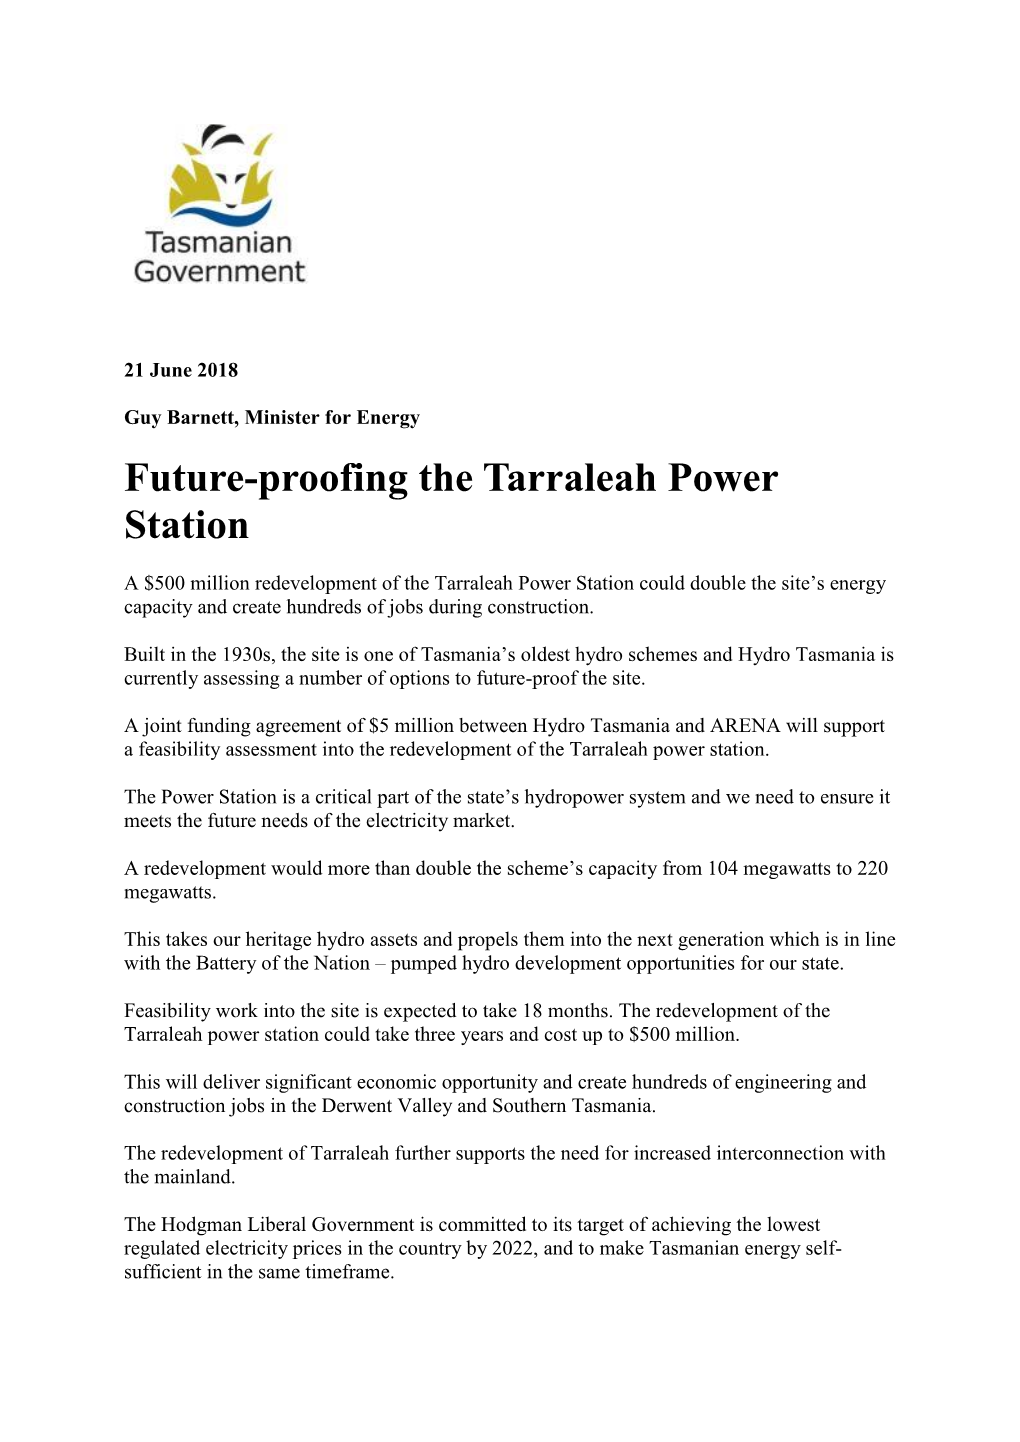 Future-Proofing the Tarraleah Power Station